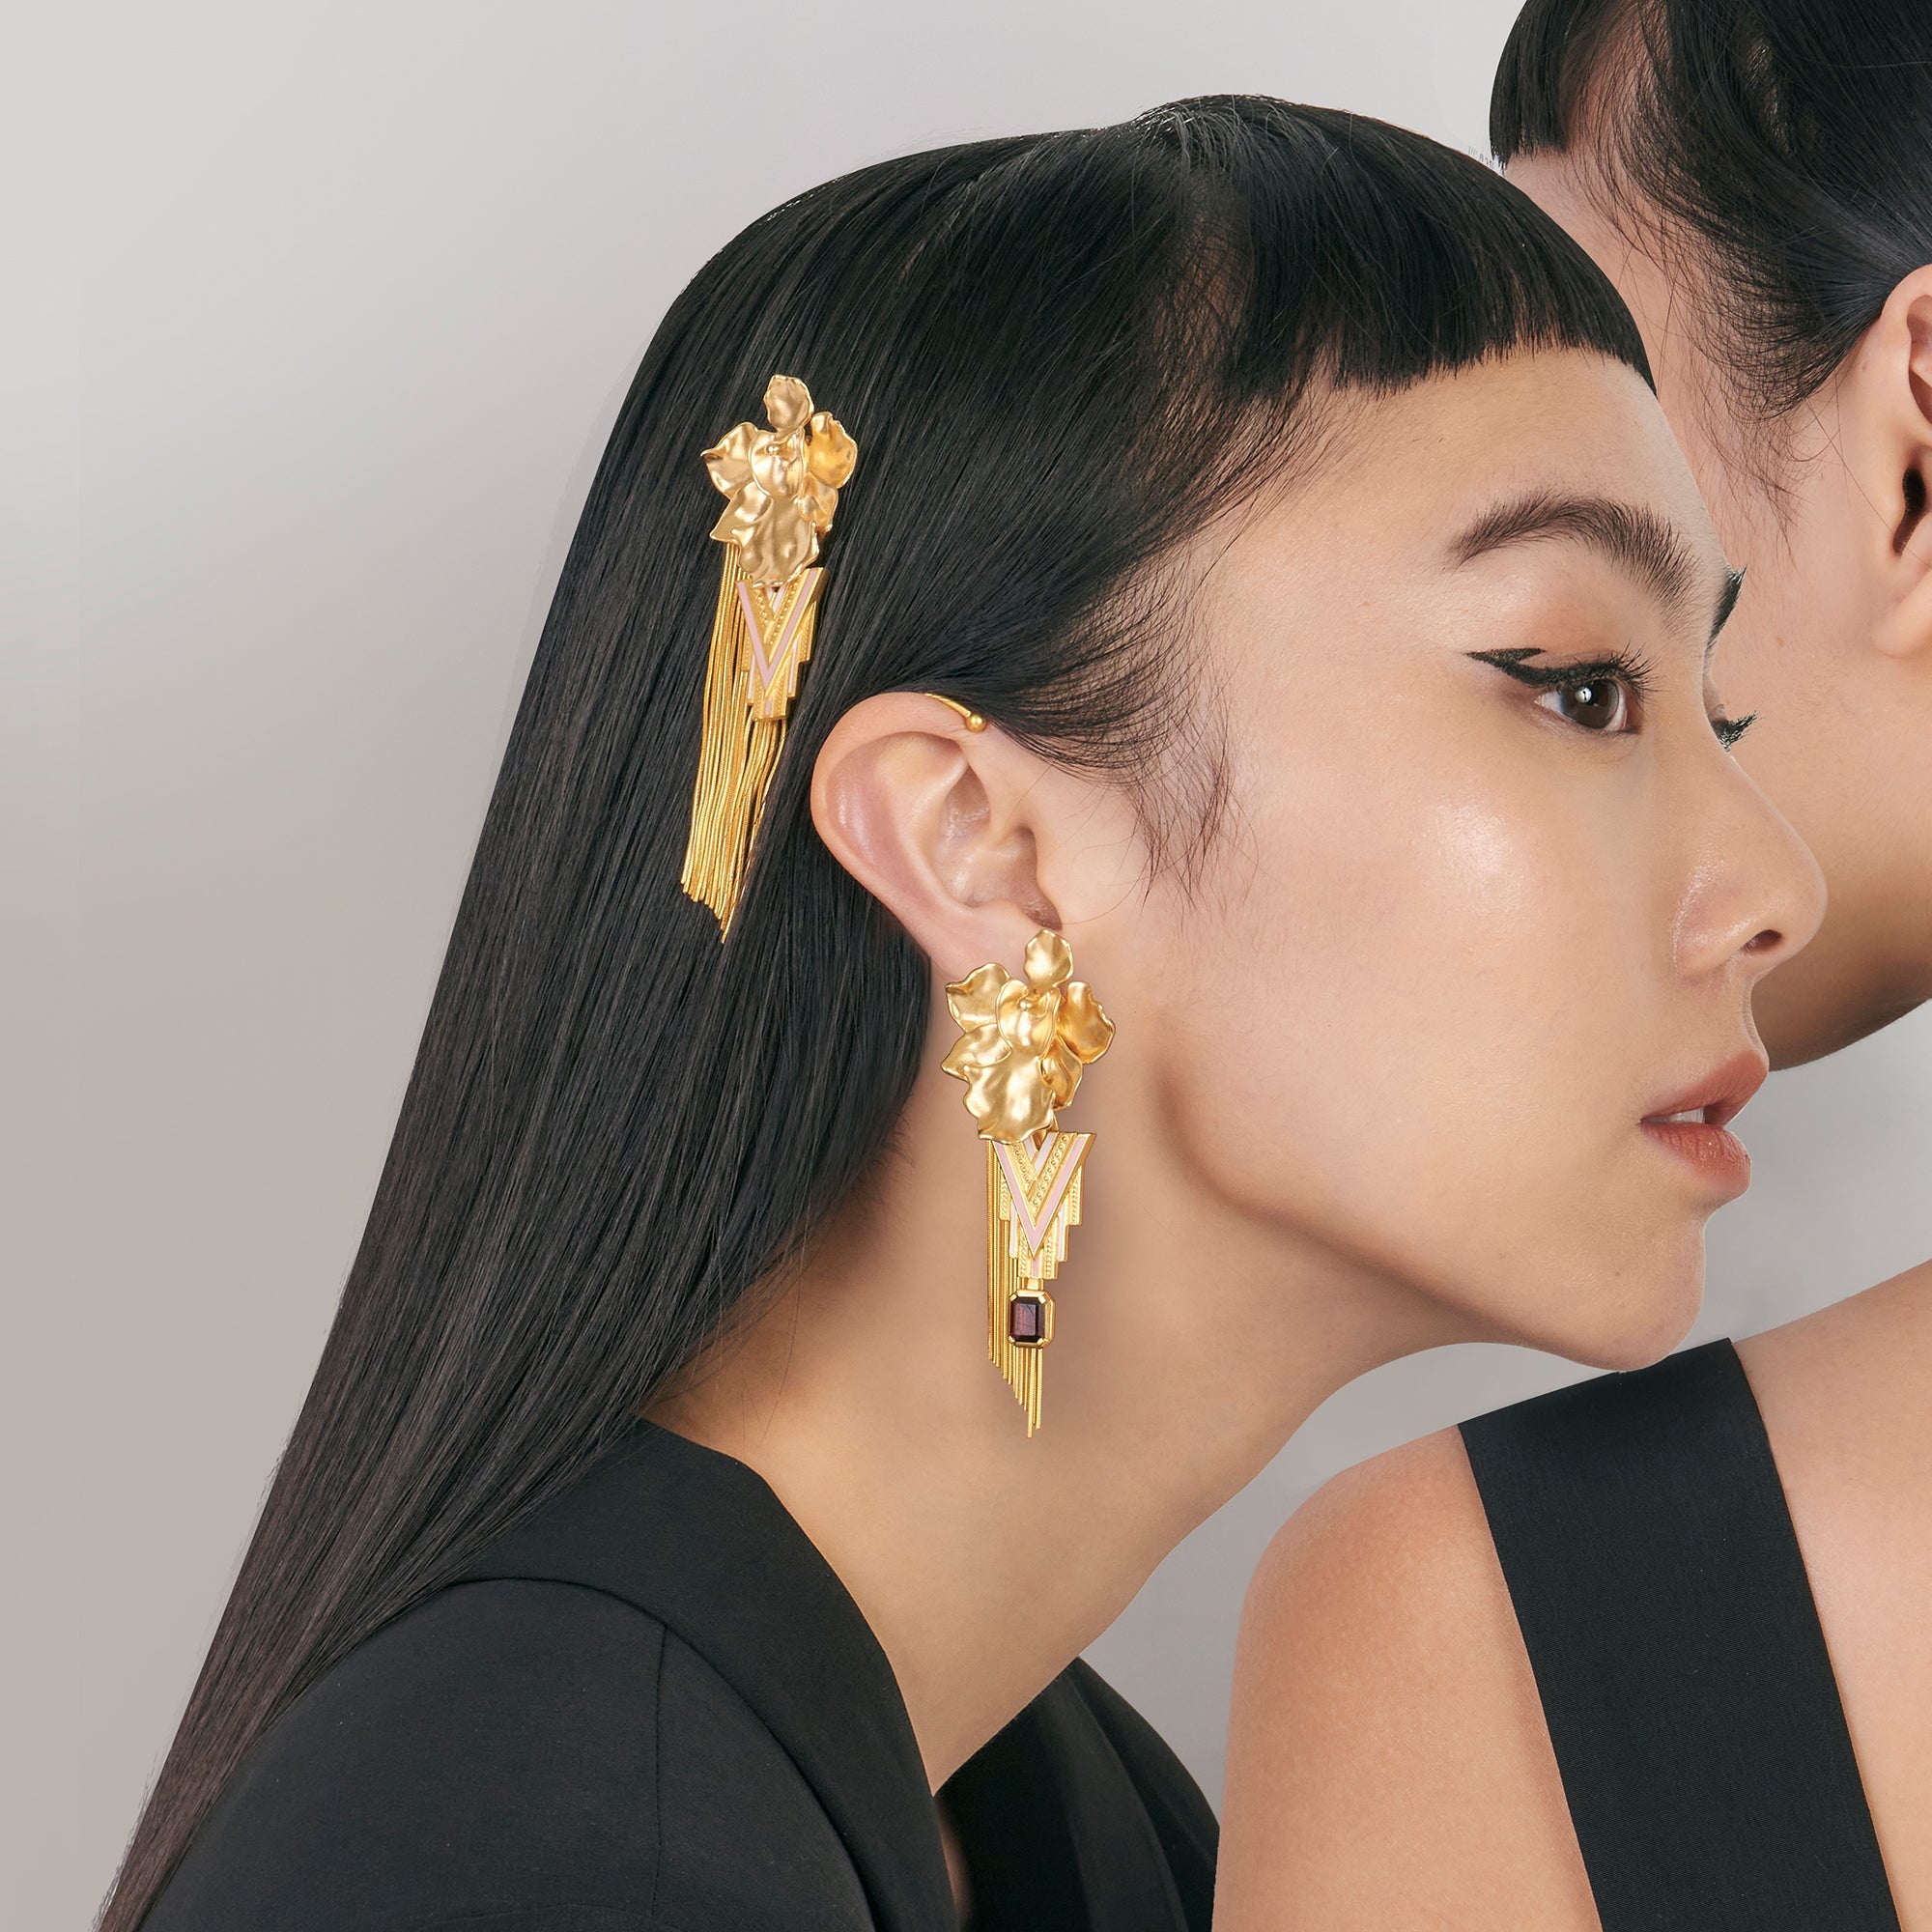 RISIS X STOLEN Iconic Vanda Miss Joaquim Orchid Ear Cuff Collection Close Up Shot on Model 